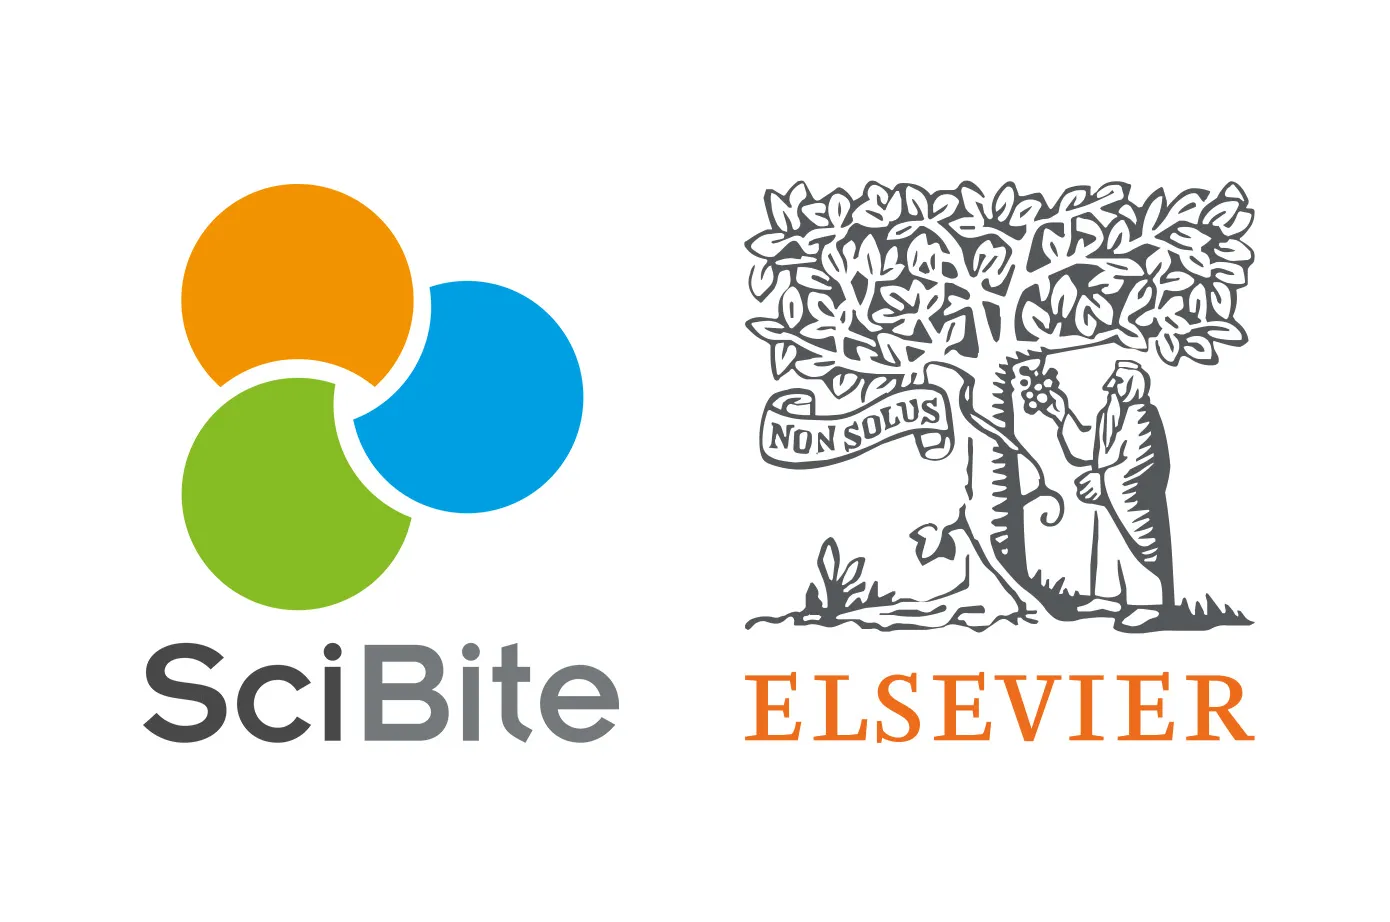 SciBite and Elsevier company logos